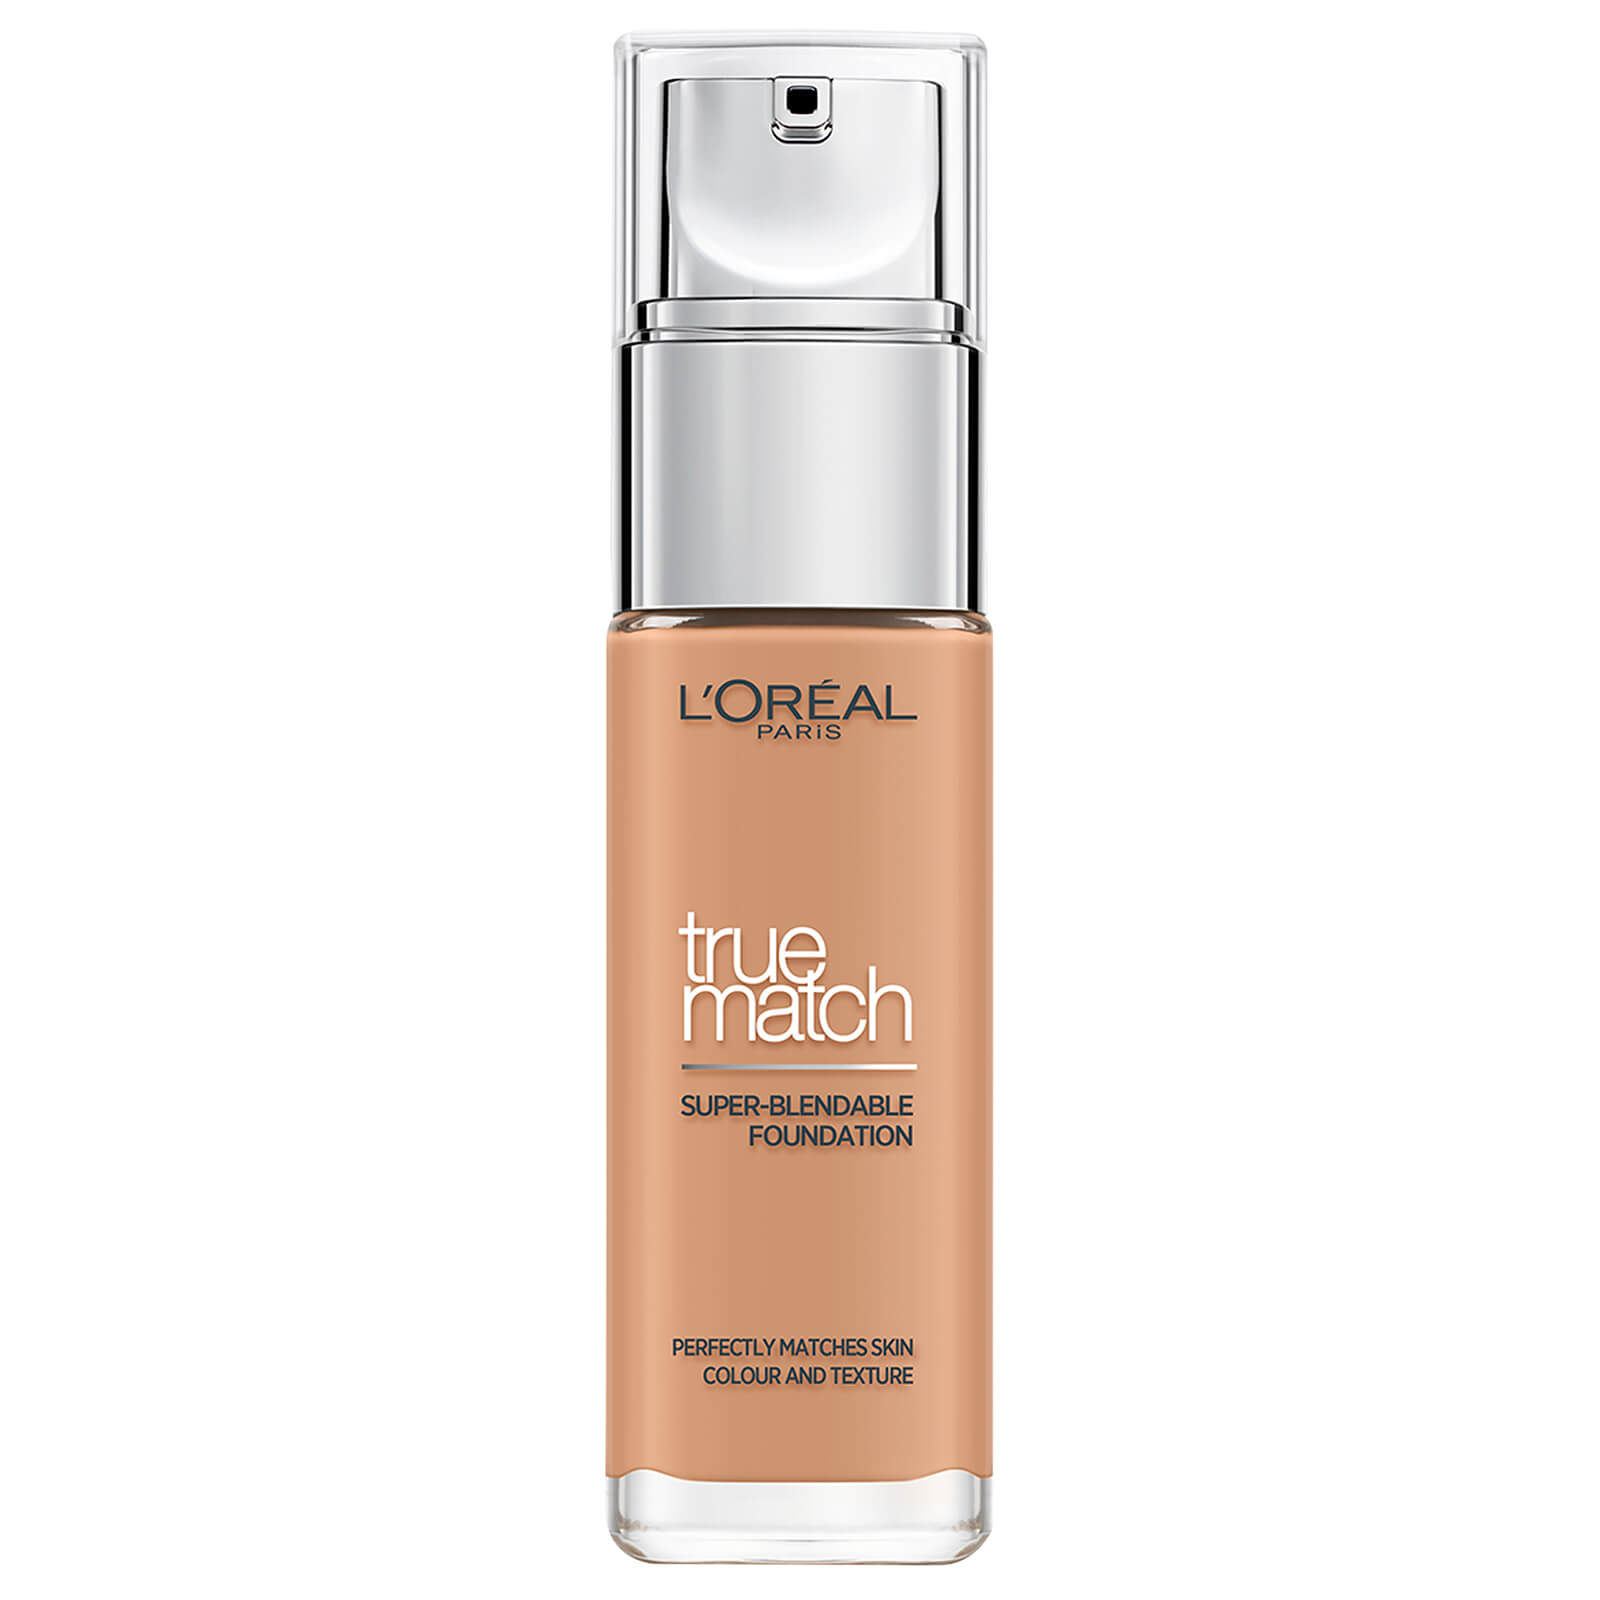 L'Oréal Paris True Match Liquid Foundation with SPF and Hyaluronic Acid 30ml (Various Shades) - 4.5N True Beige